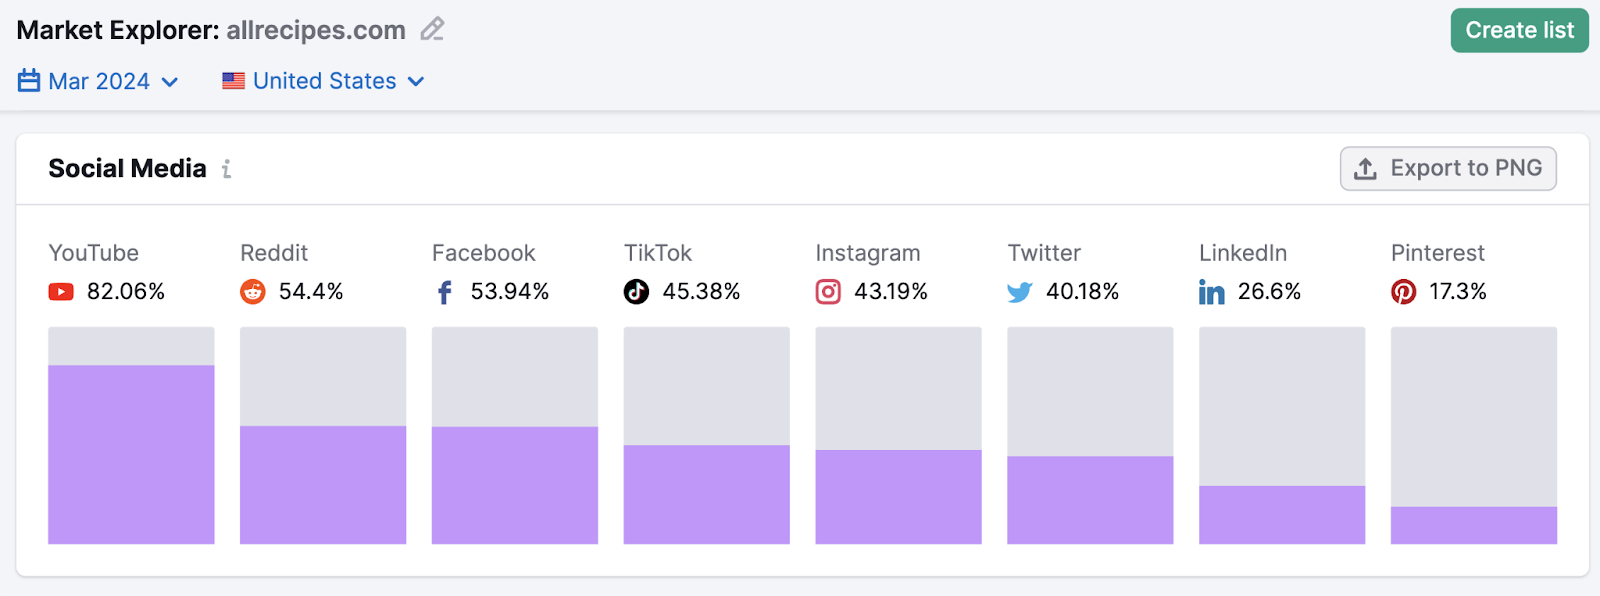 Market explorer's audience social media widget showing platforms by popularity of use